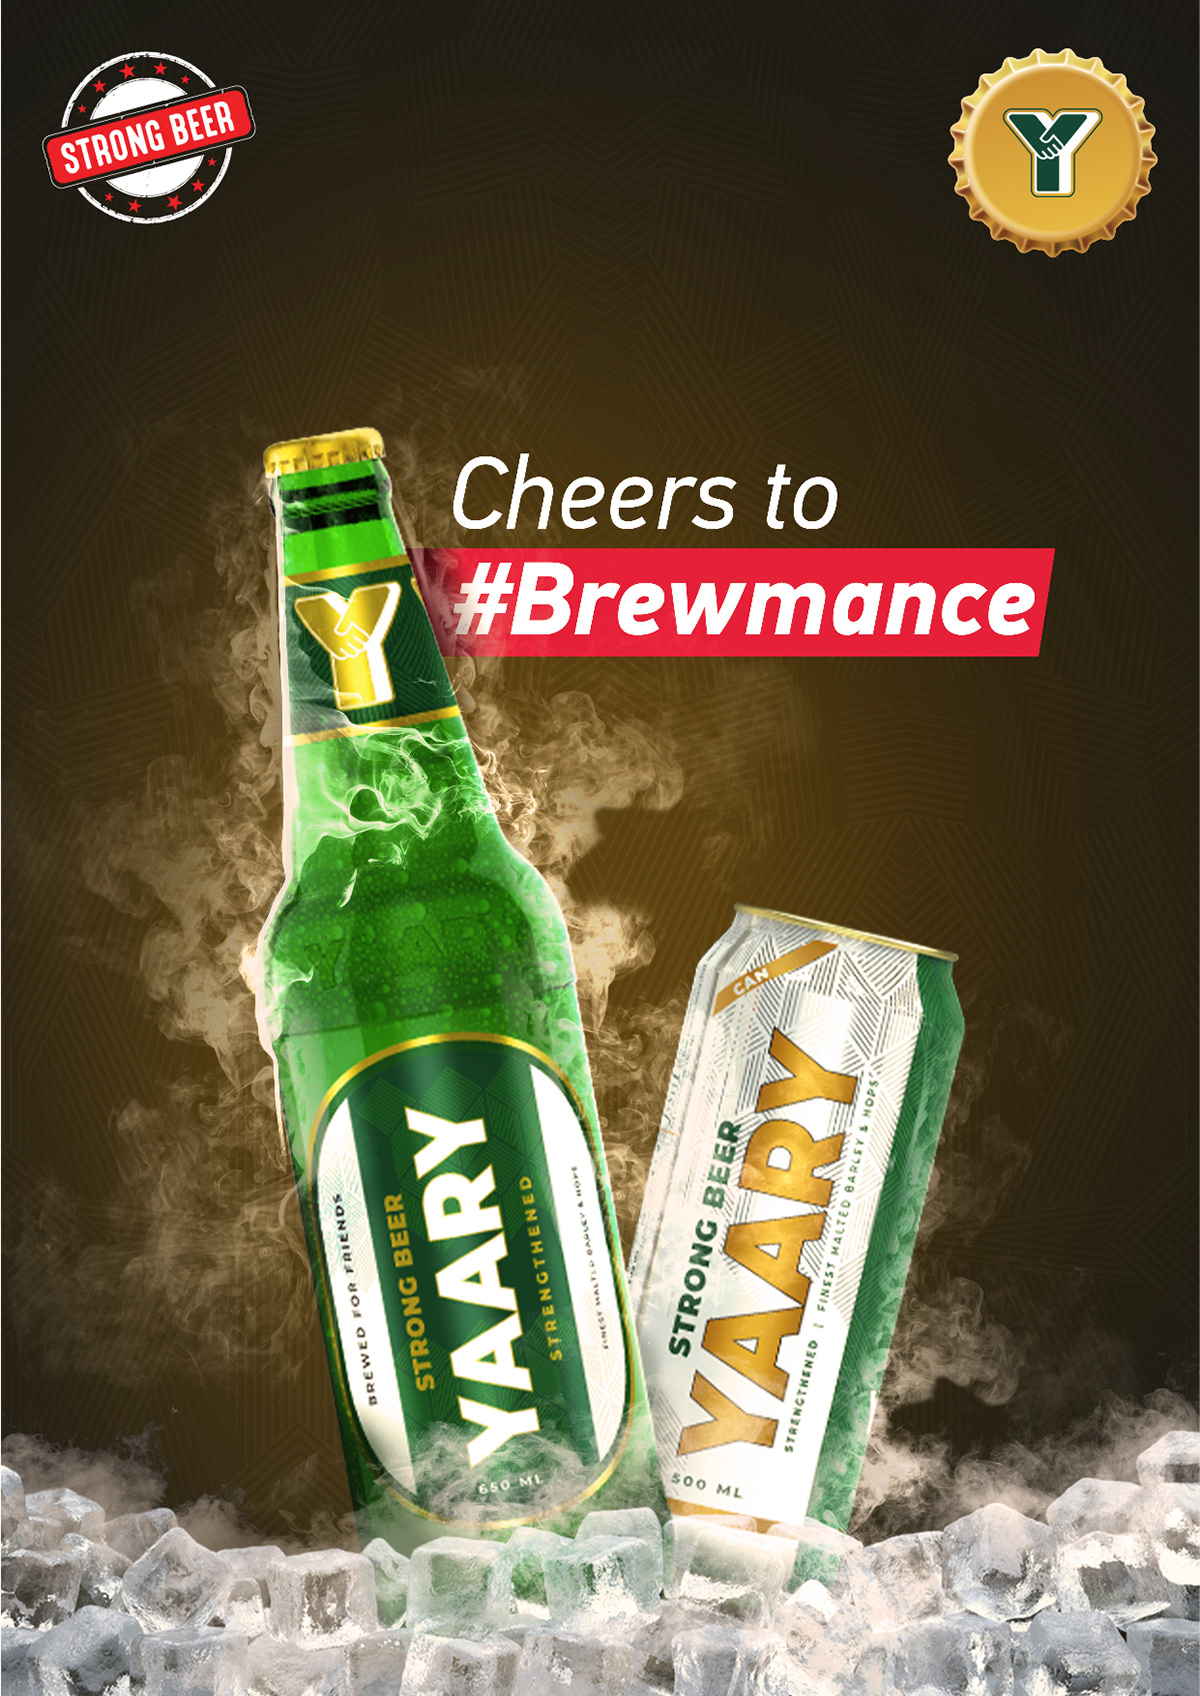 campaign ads banner brand identity visual beer drink adverising